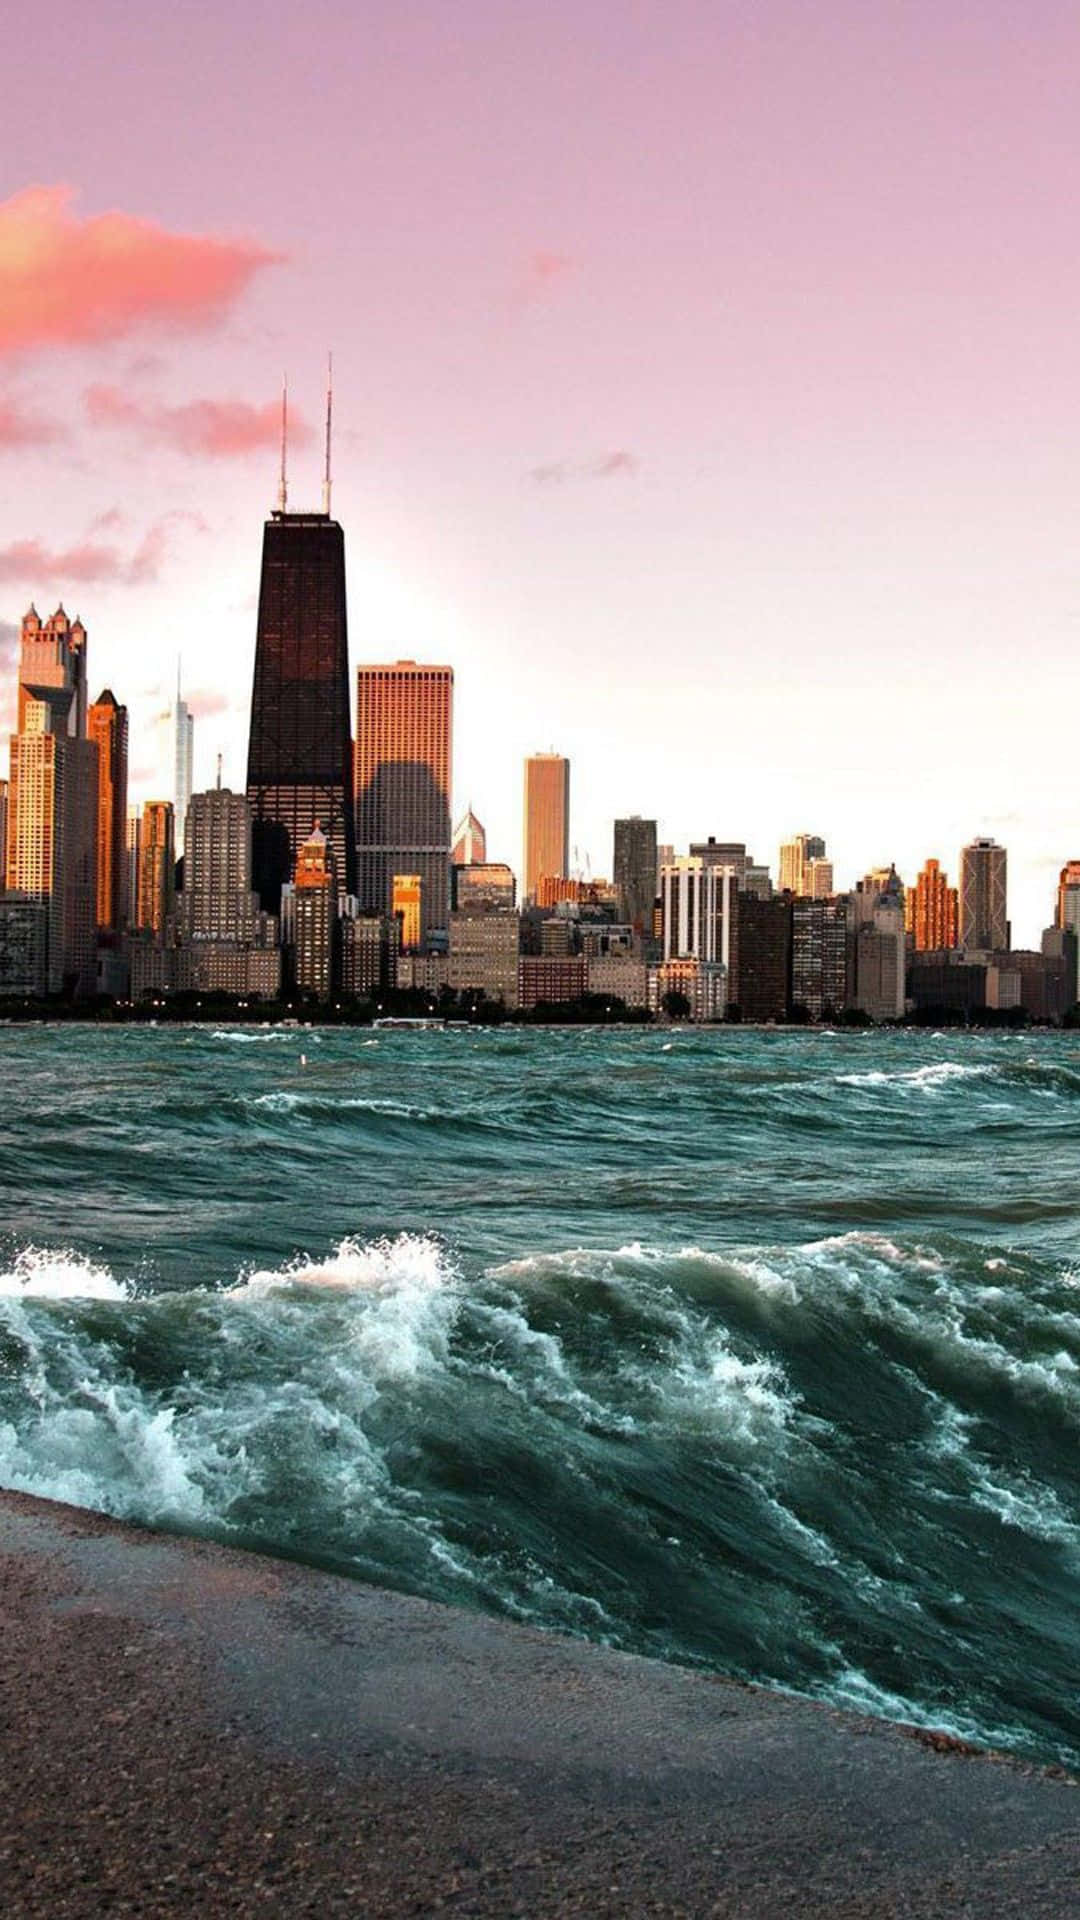 The Magnificent Mile skyline seen from Lake Michigan in Chicago